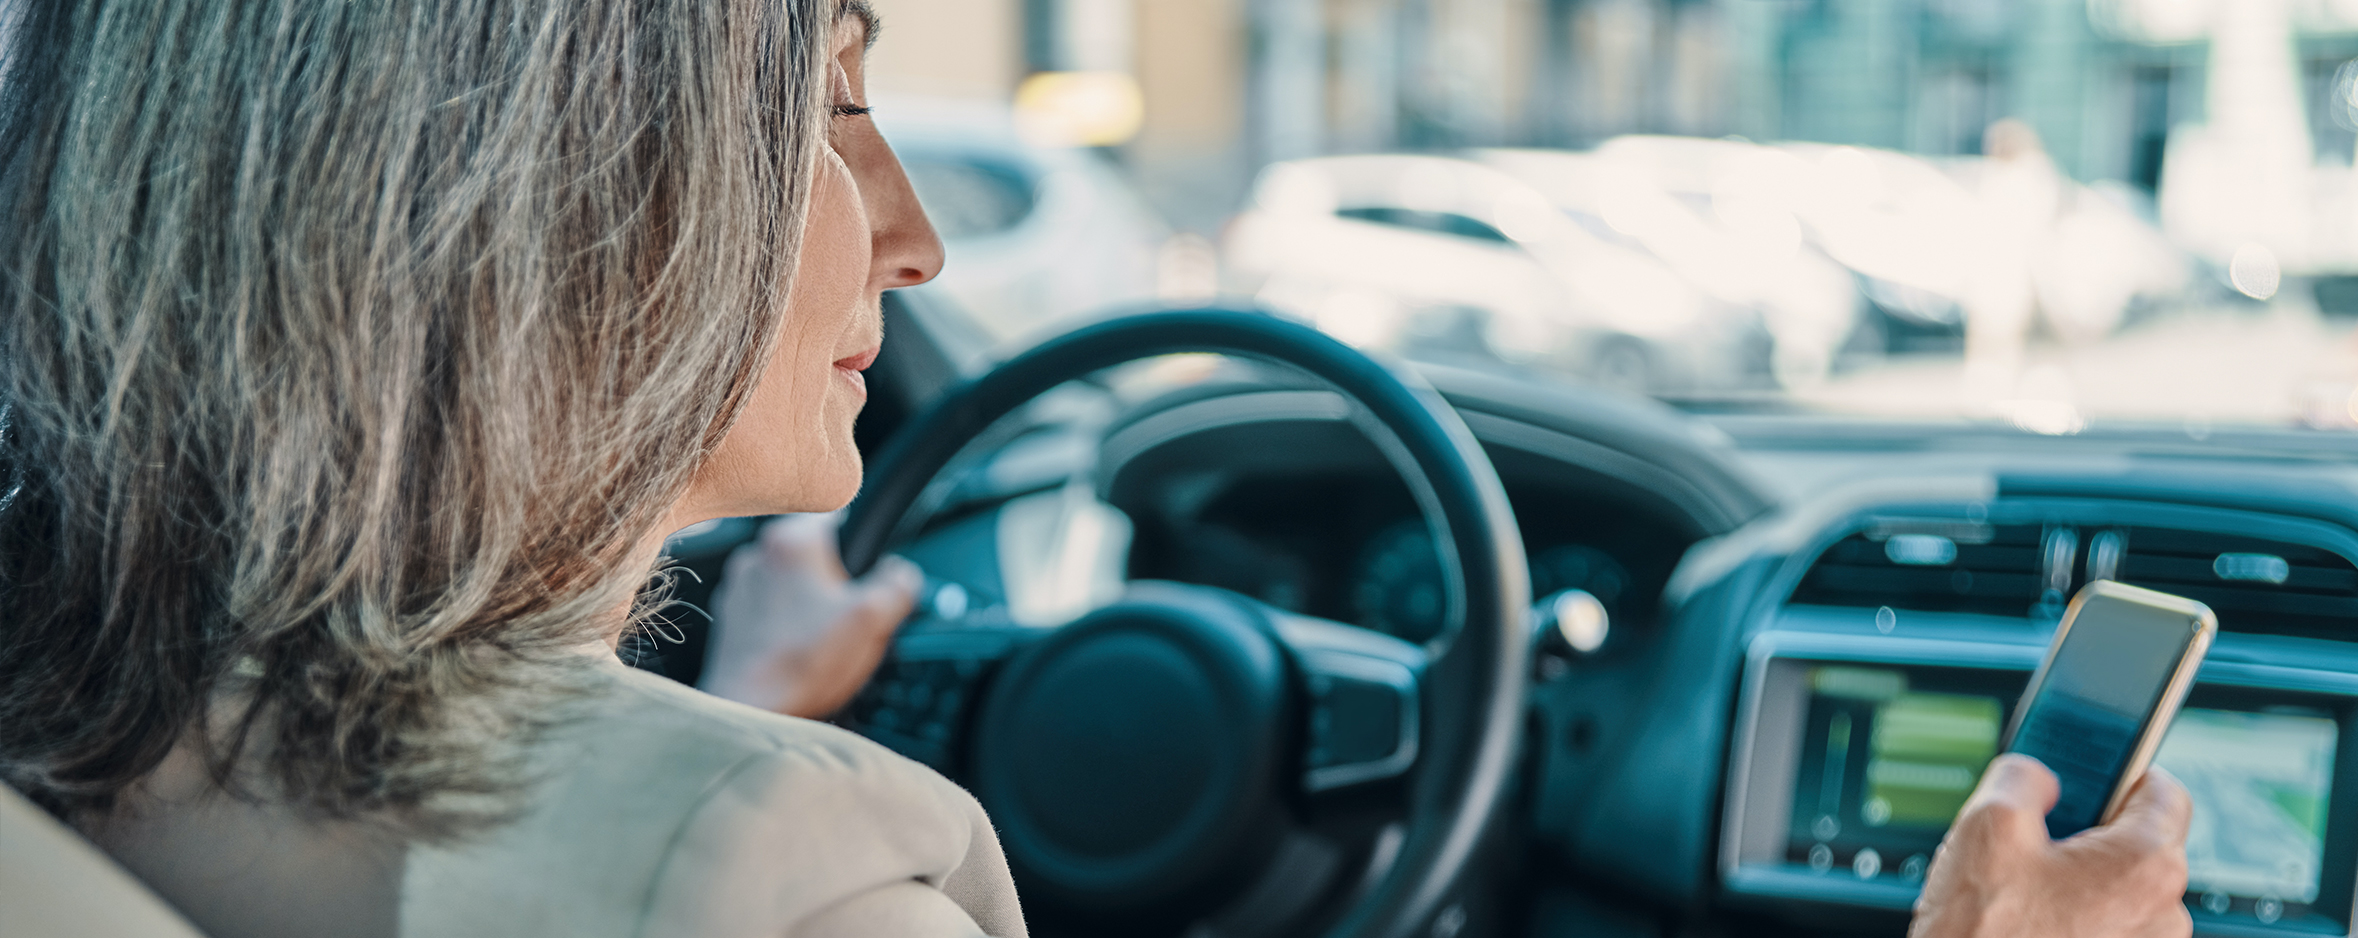 Woman experiencing a personalized vehicle feature